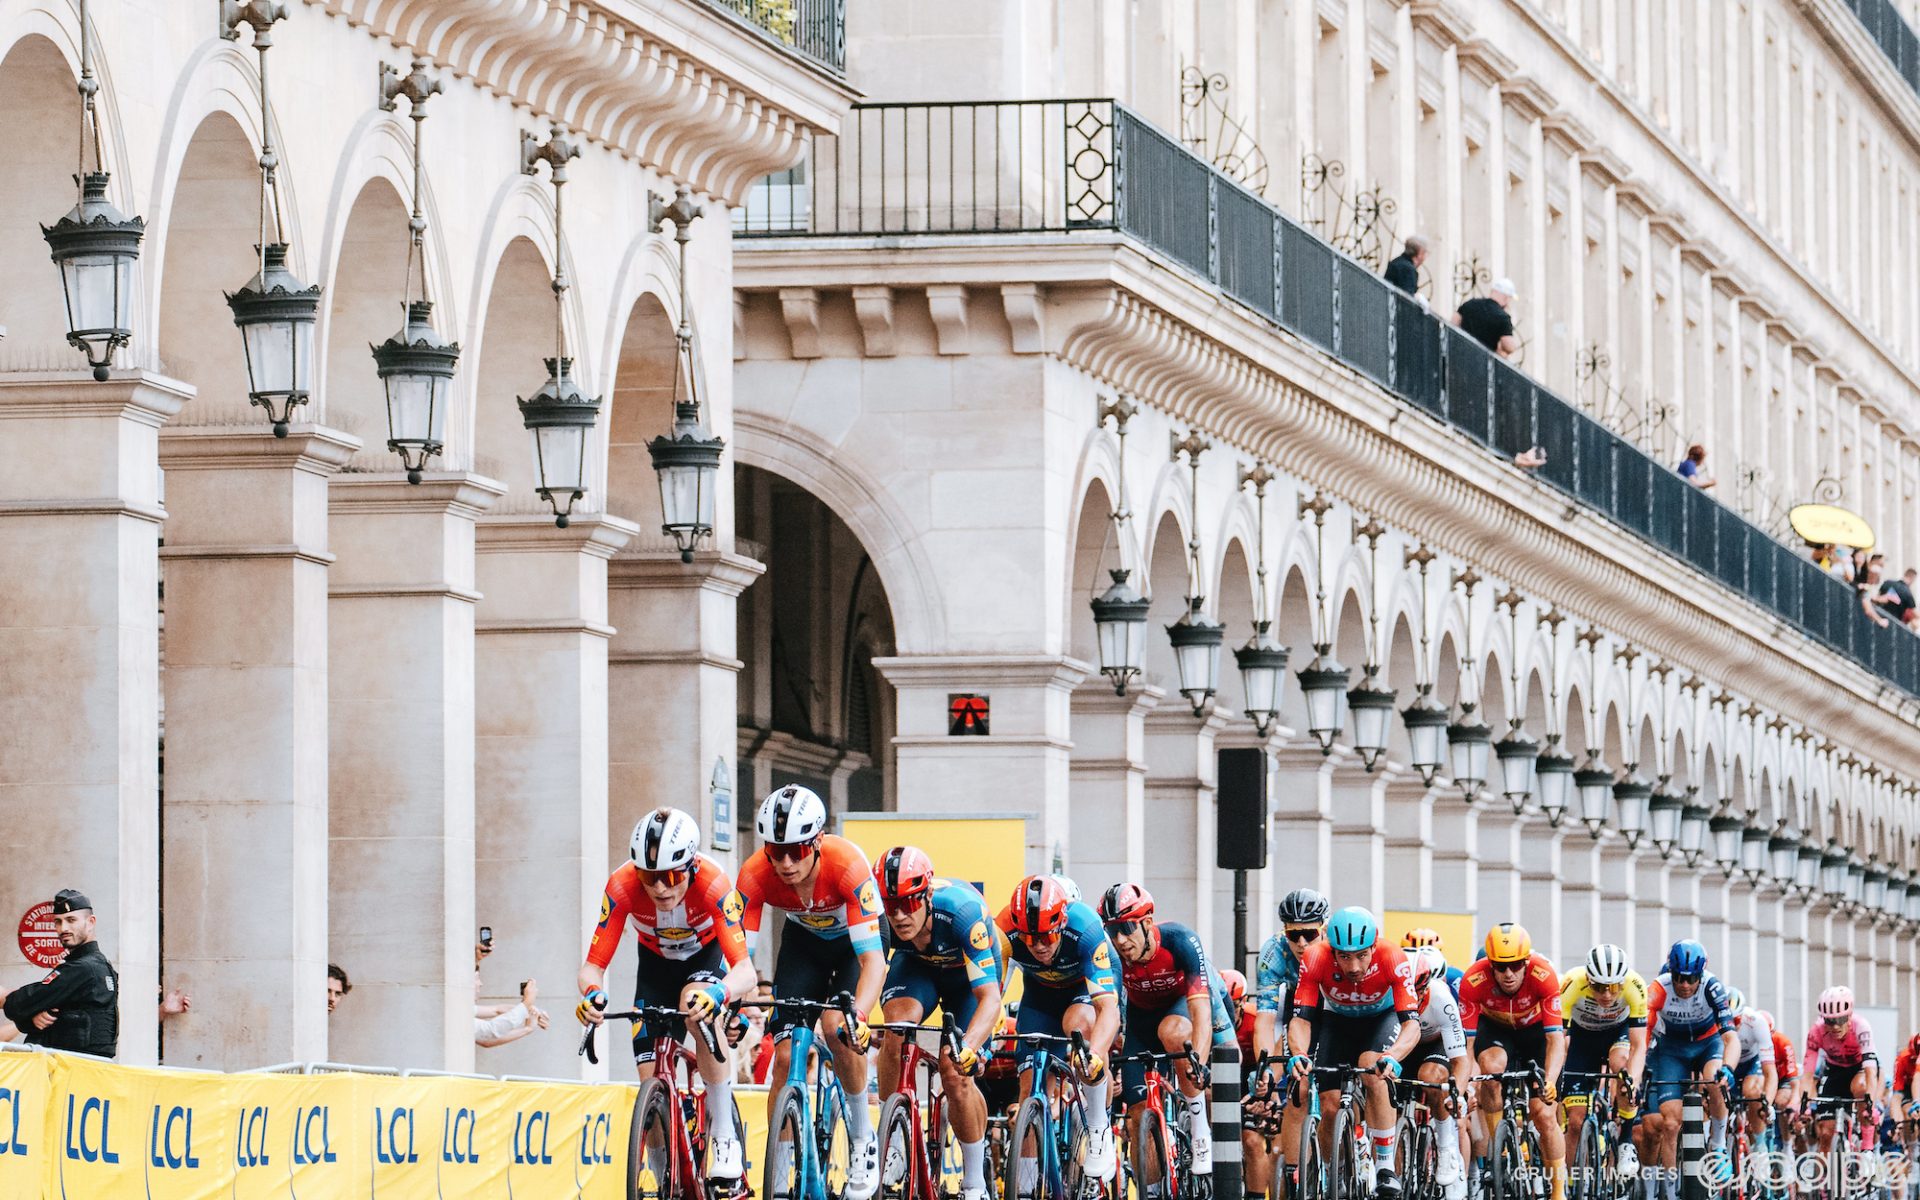 The Lidl-Trek team rides at the front of the pack in the Tour de France. Multiple riders are on the front in a train and the pack is strung out behind.